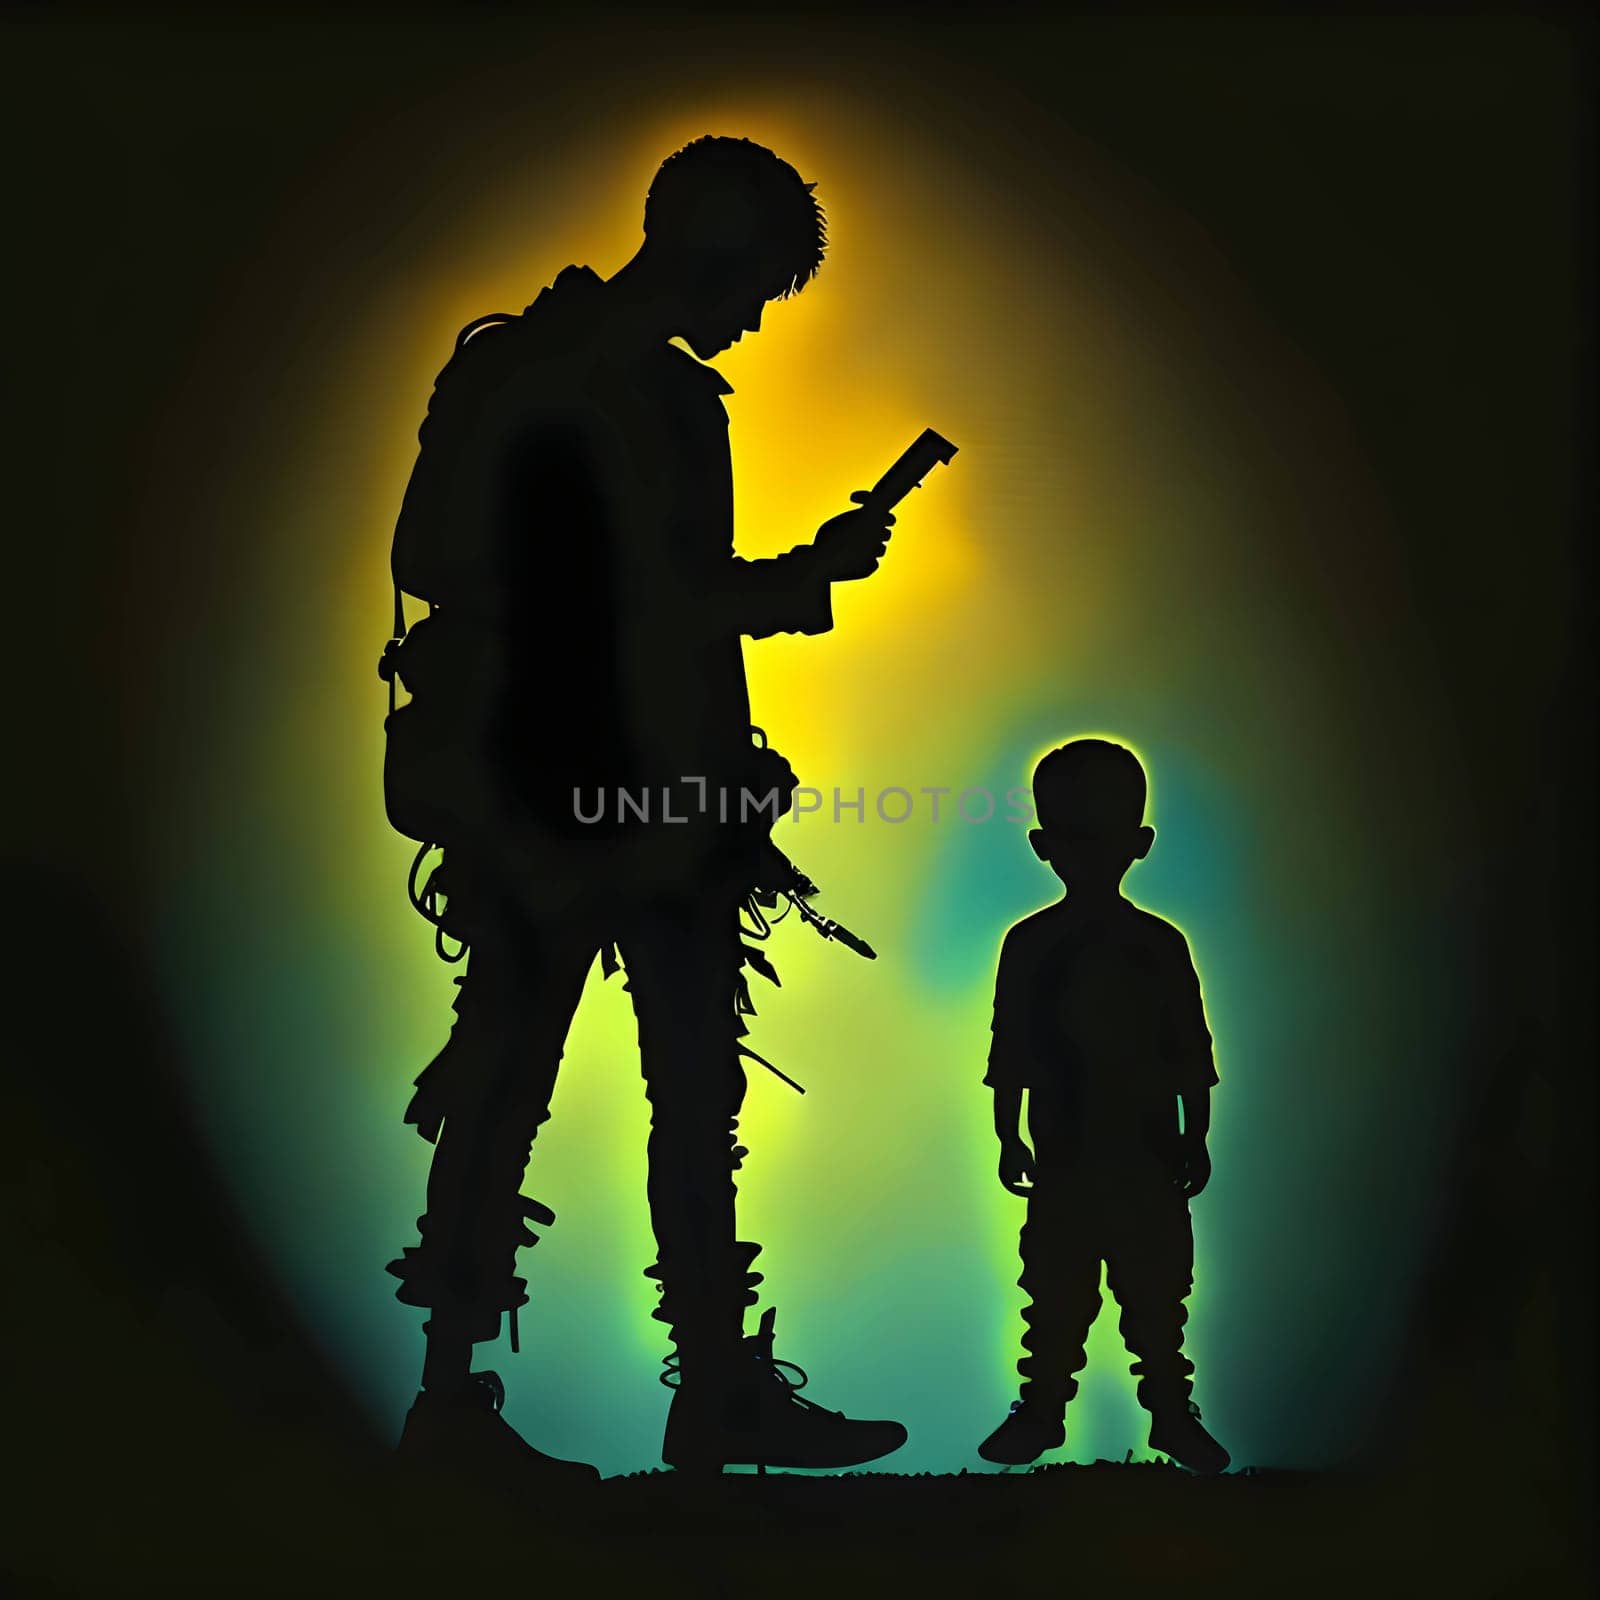 Vector illustration of a two boys in black silhouette against a clean colorful background, capturing graceful forms.